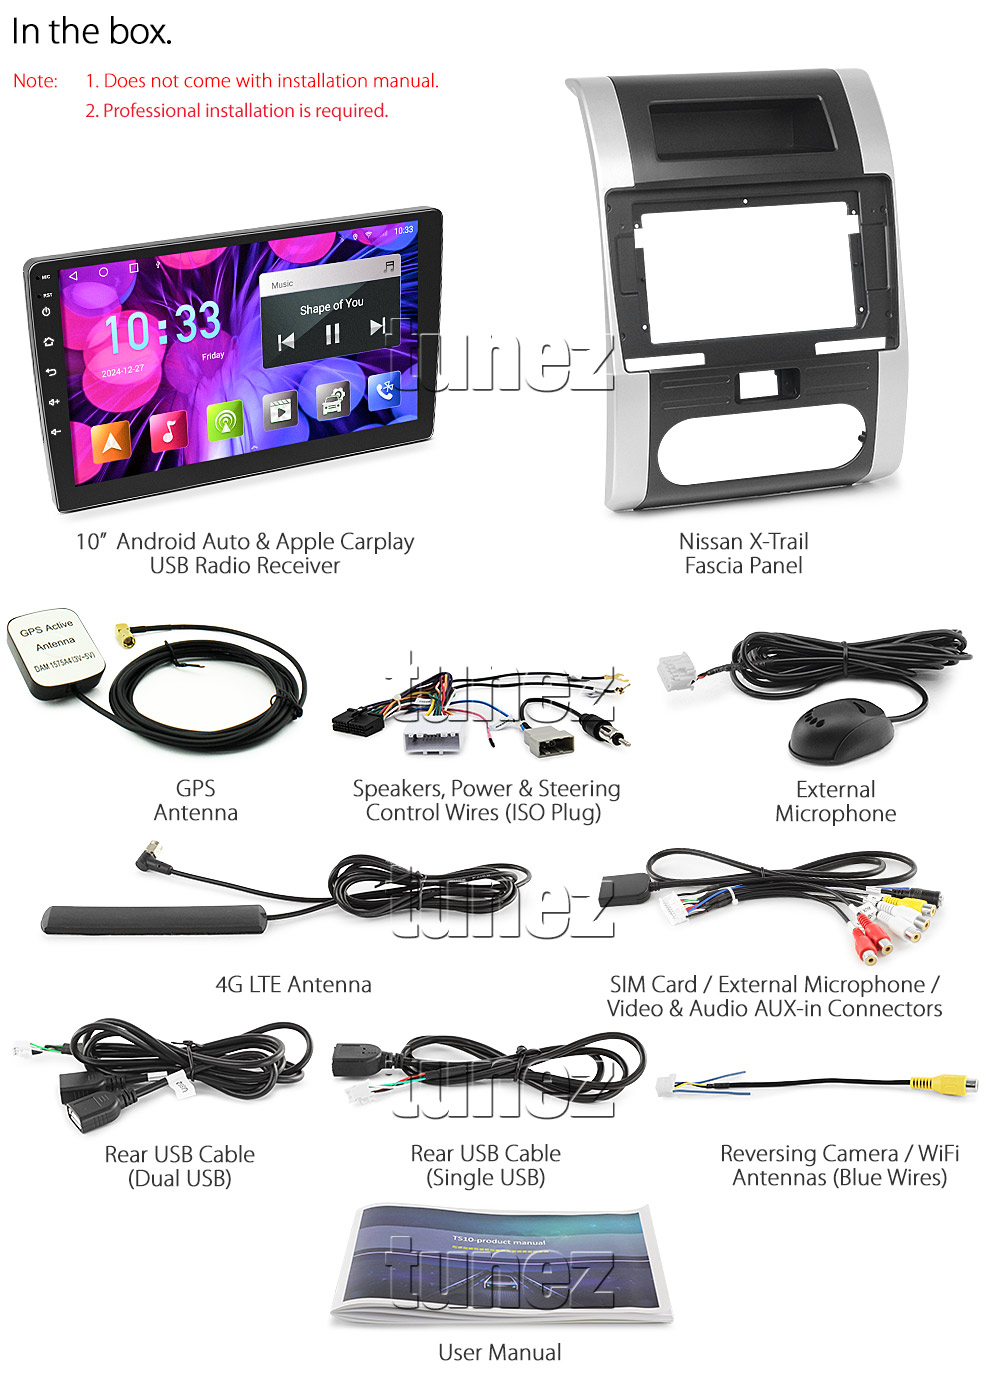 NXT03AND GPS Aftermarket Nissan X-Trail XTrail X Trail T31 2nd Generation Gen Year 2007 2008 2009 2010 2011 2012 2013 capacitive 10 inches touchscreen Universal Double DIN Latest Australia UK European USA Original CarPlay Android Auto 10 Car USB player radio stereo 4GdLTE WiFi head unit details Aftermarket External and Internal Microphone Bluetooth Europe Sat Nav Navi Plug and Play ISO Plug Wiring Harness Matching Fascia Kit Facia Free Reversing Camera Album Art ID3 Tag RMVB MP3 MP4 AVI MKV Full High Definition FHD 1080p DAB+ Digital Radio DAB + Connects2 CTSIZ001.2